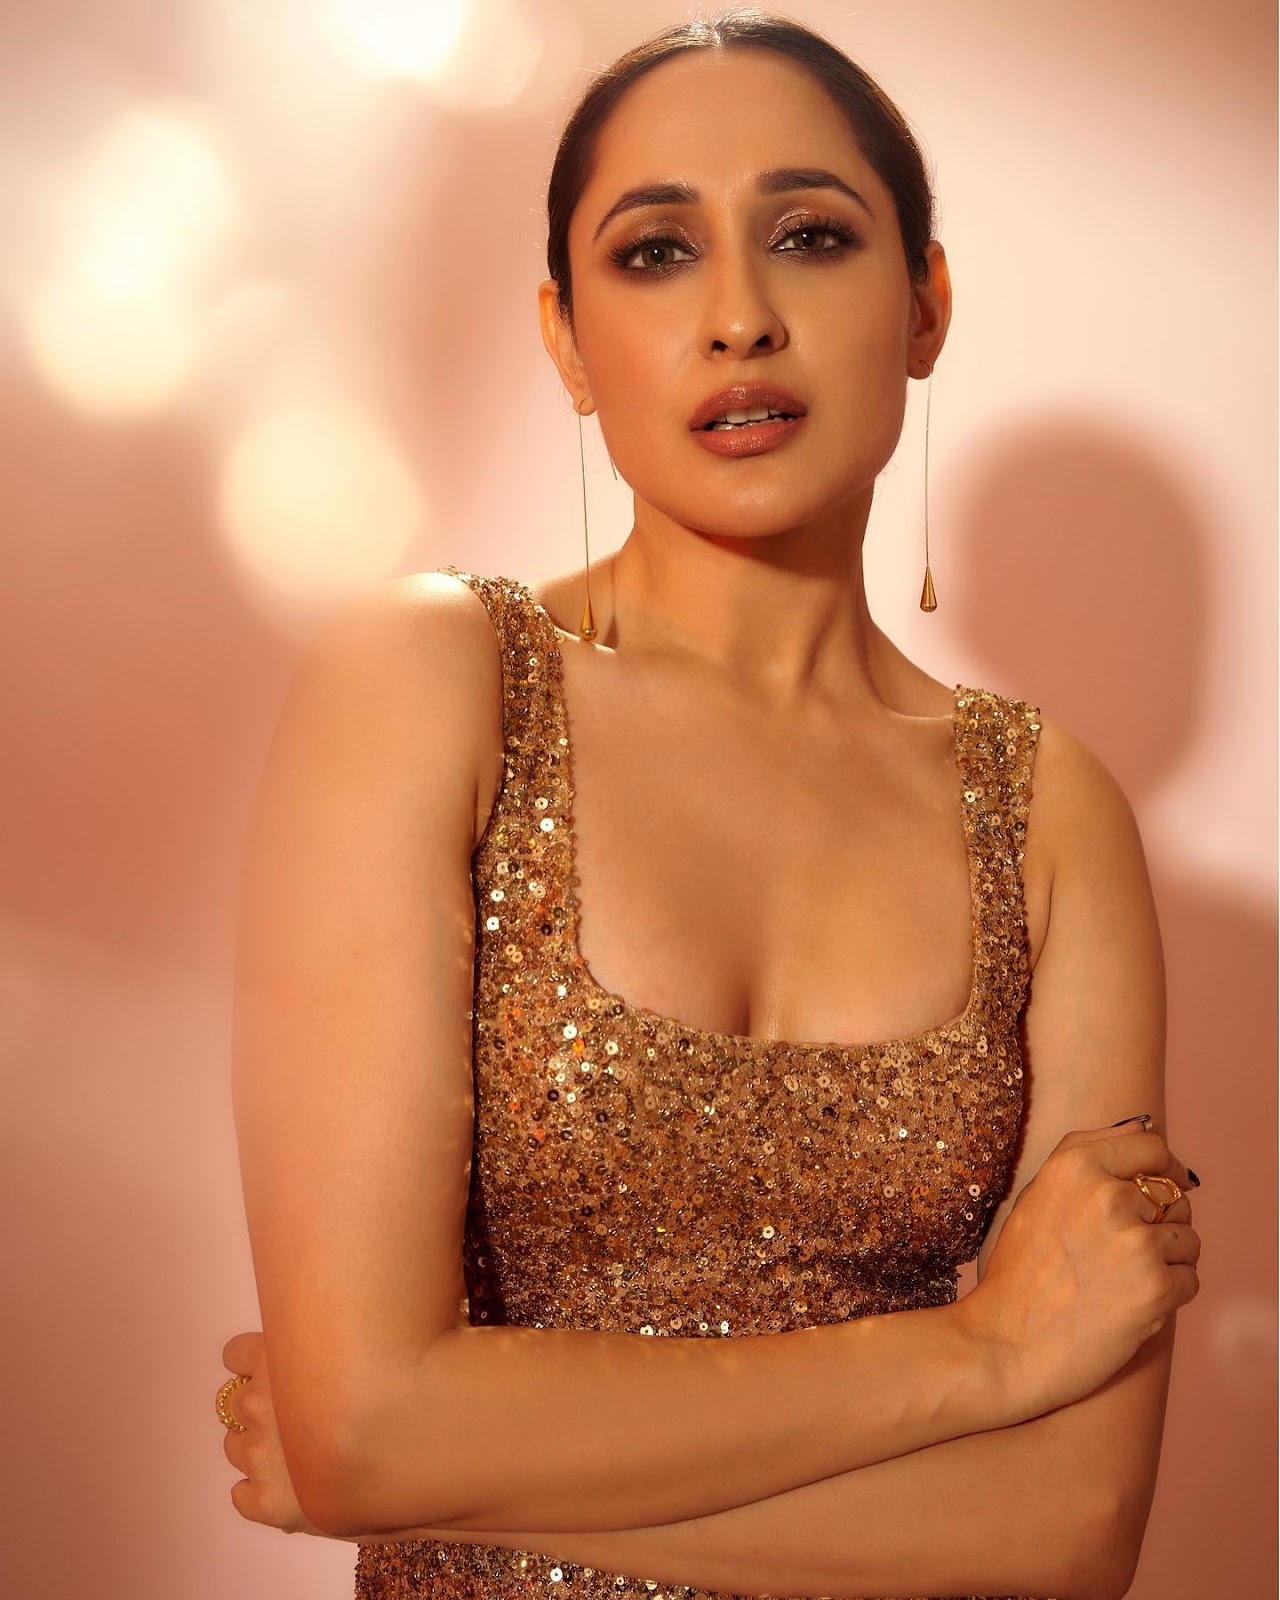 Pragya Jaiswal in high slit shimmery gown is too hot to handle - see her  glamorous avatar.